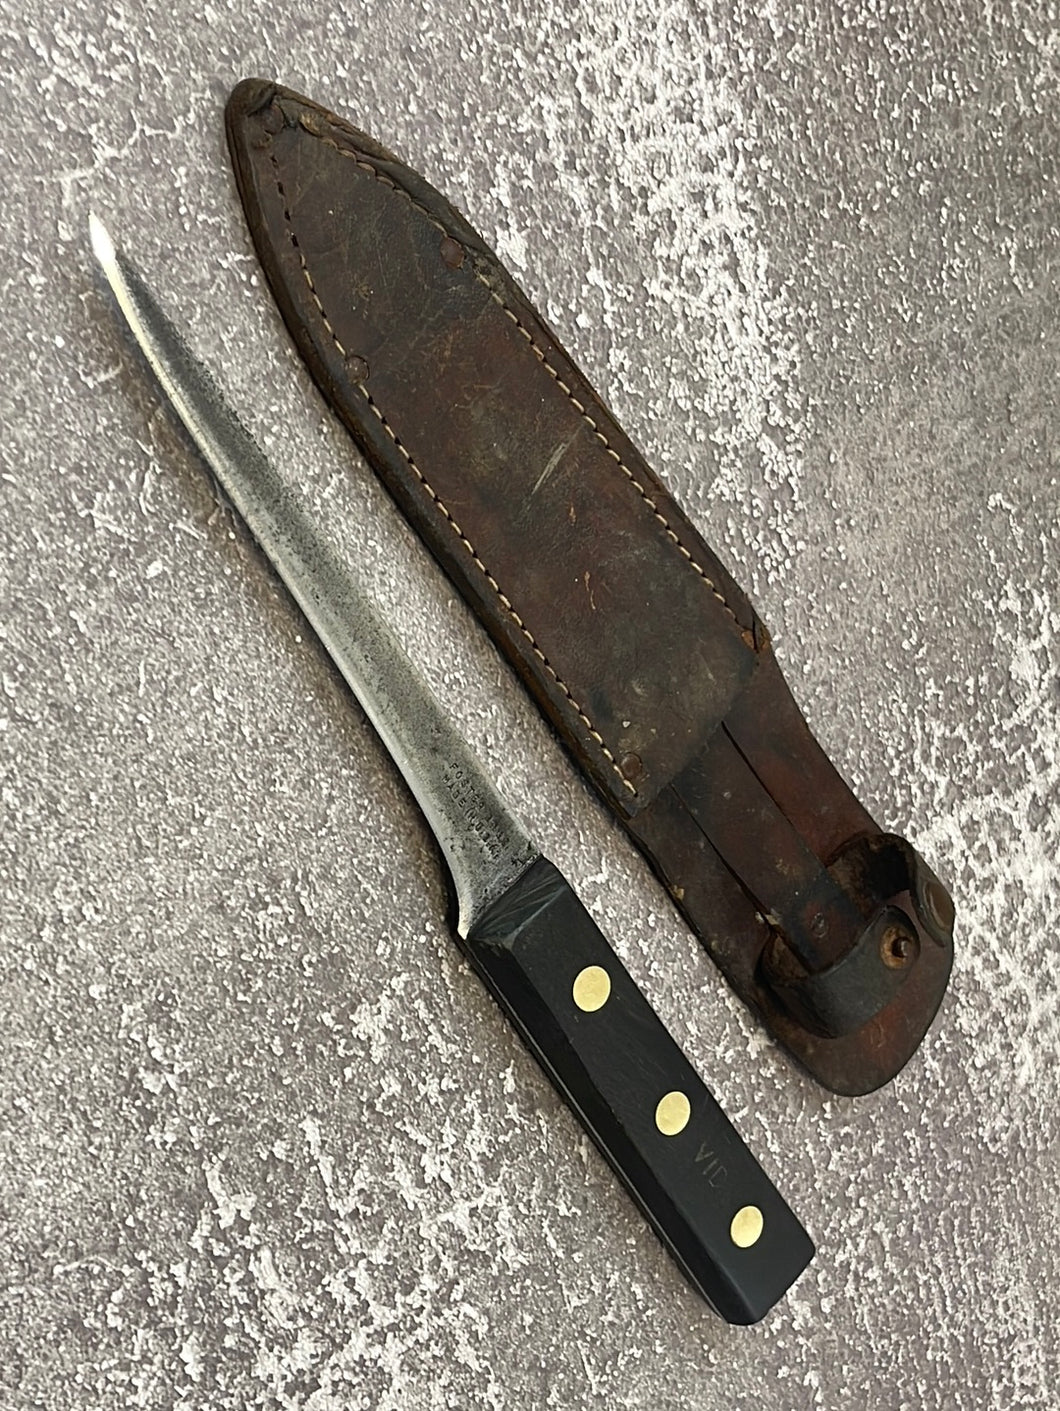 Vintage Foster Bros Boning Knife 14cm & leather sheath Carbon Steel Made in USA 🇺🇸 1191